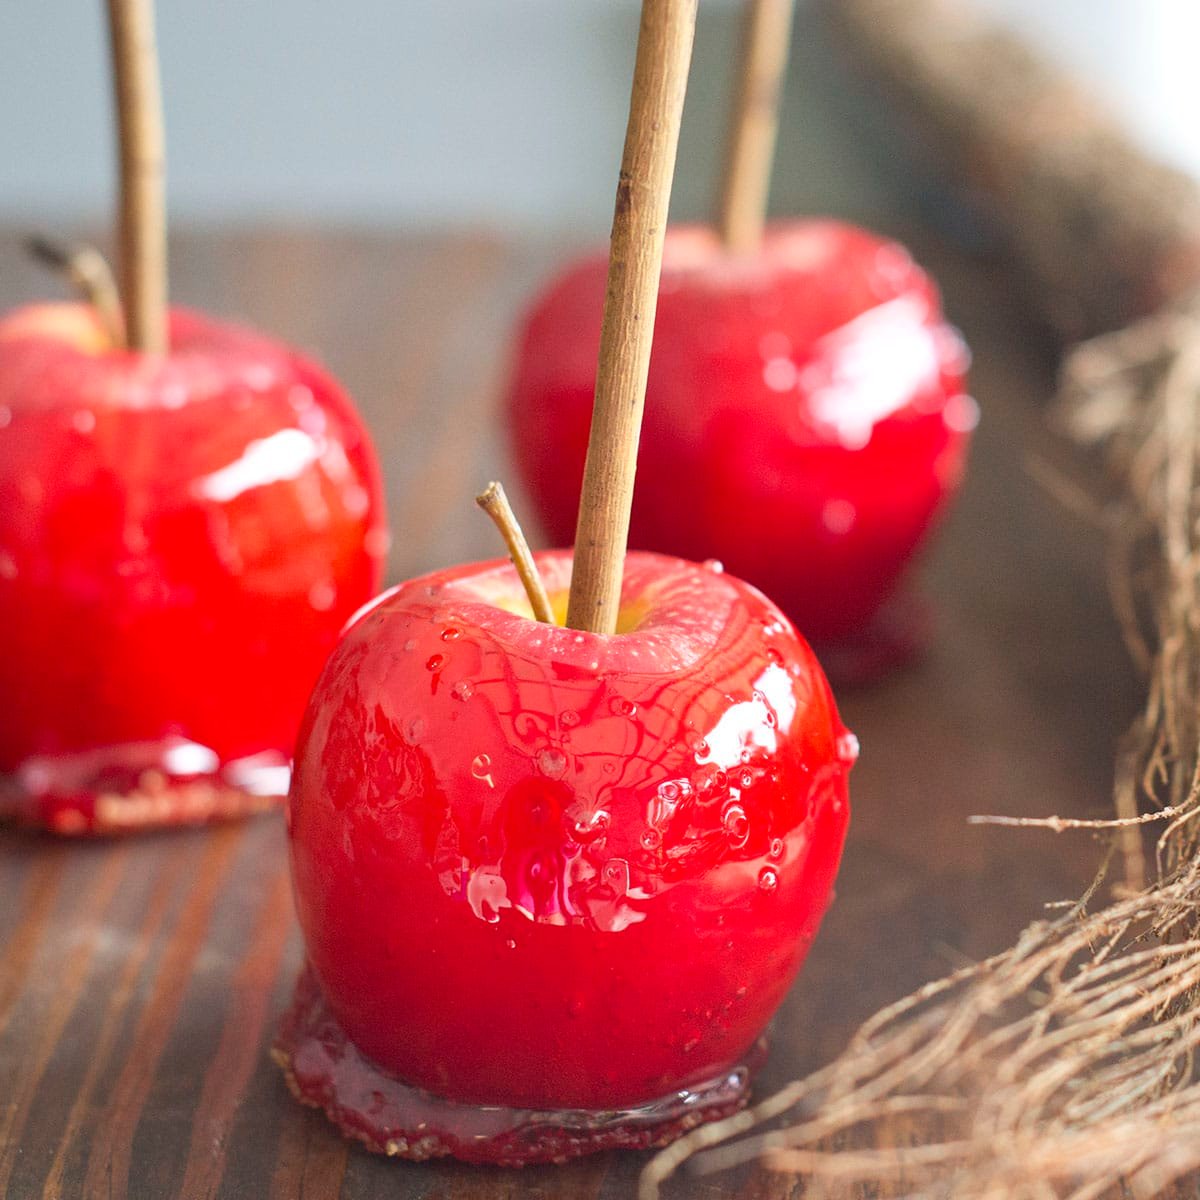 Three red apples coated in candy with rustic sticks coming out of the tops. There's grassy hay beside them.